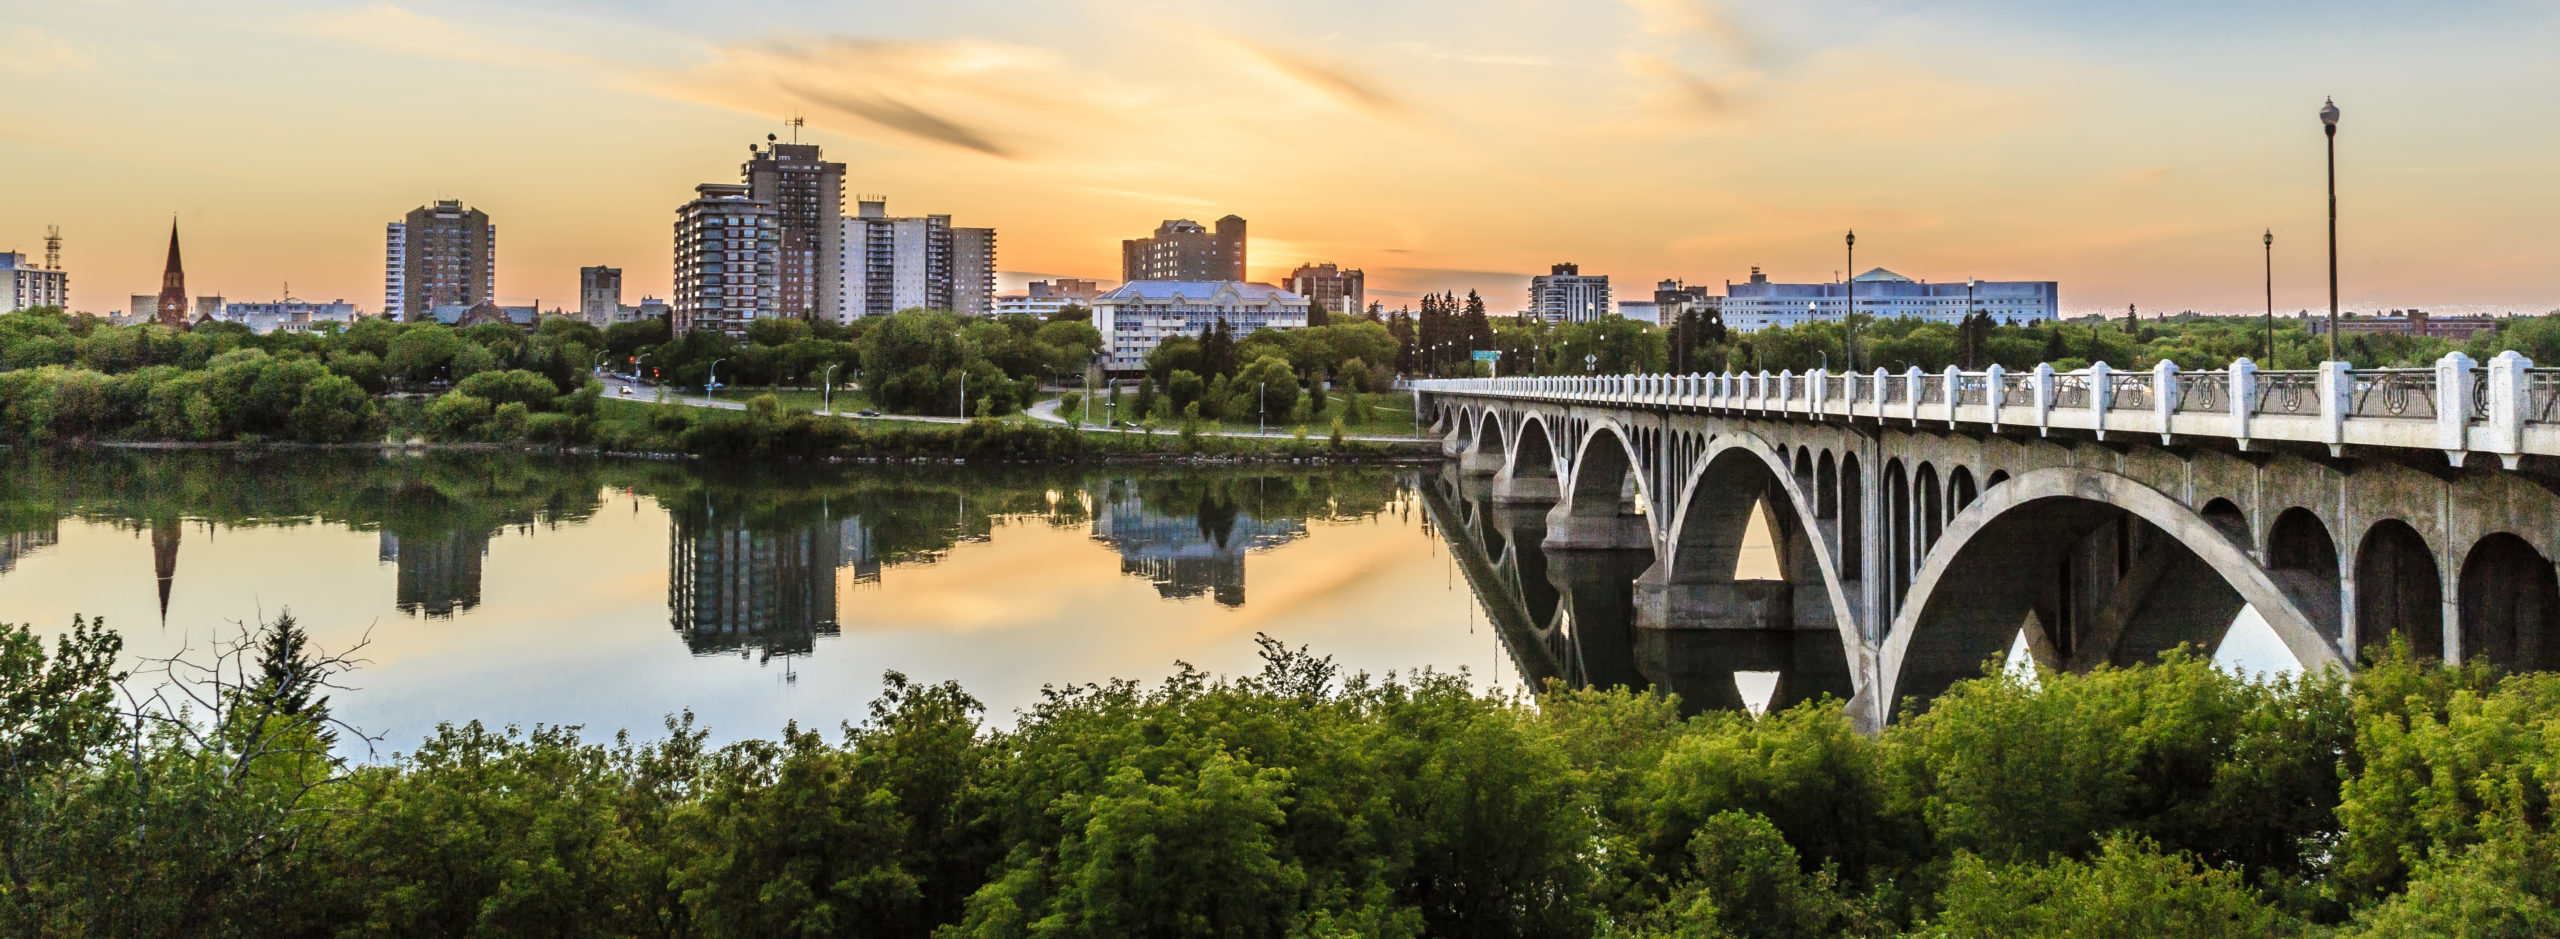 The city of Saskatoon / Getty Images